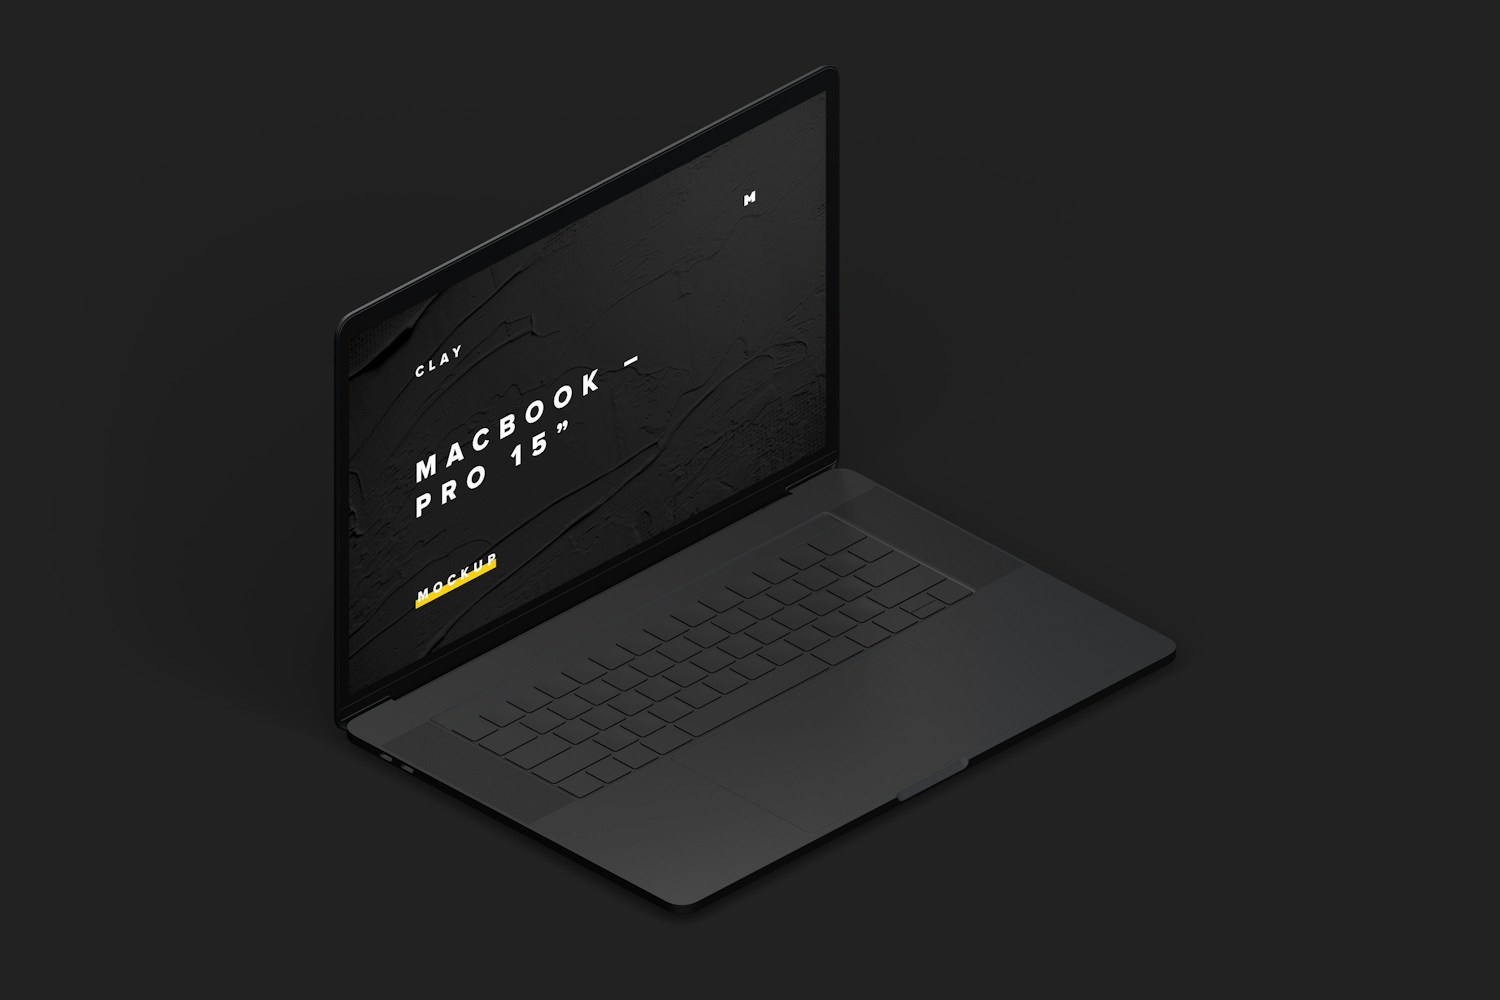 Clay MacBook Pro 15" with Touch Bar, Left Isometric View Mockup